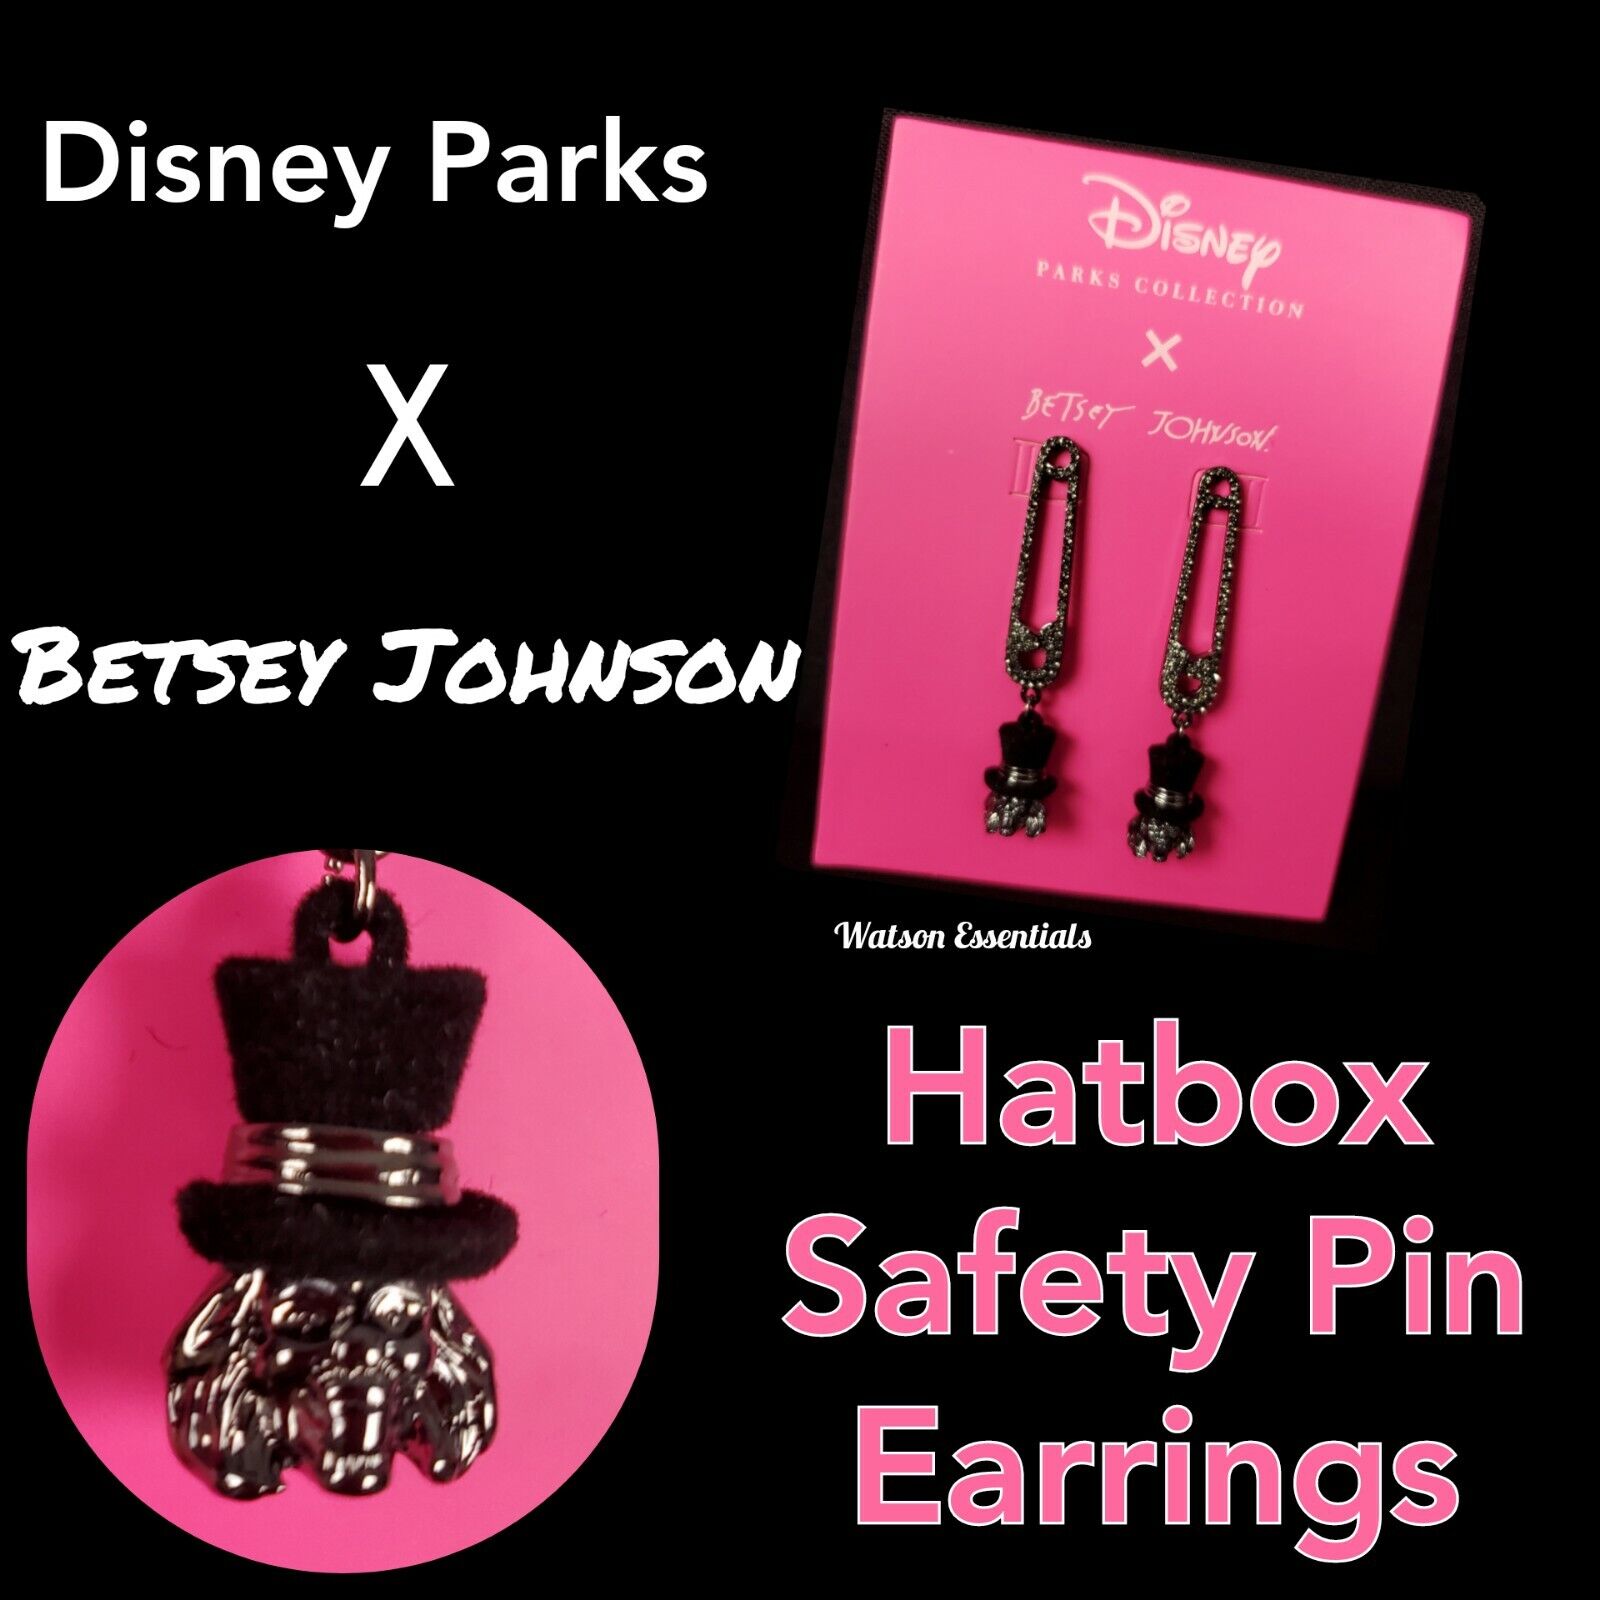 2021 Disney Haunted Mansion Hatbox Ghost Safety Pins Earrings By Betsey Johnson